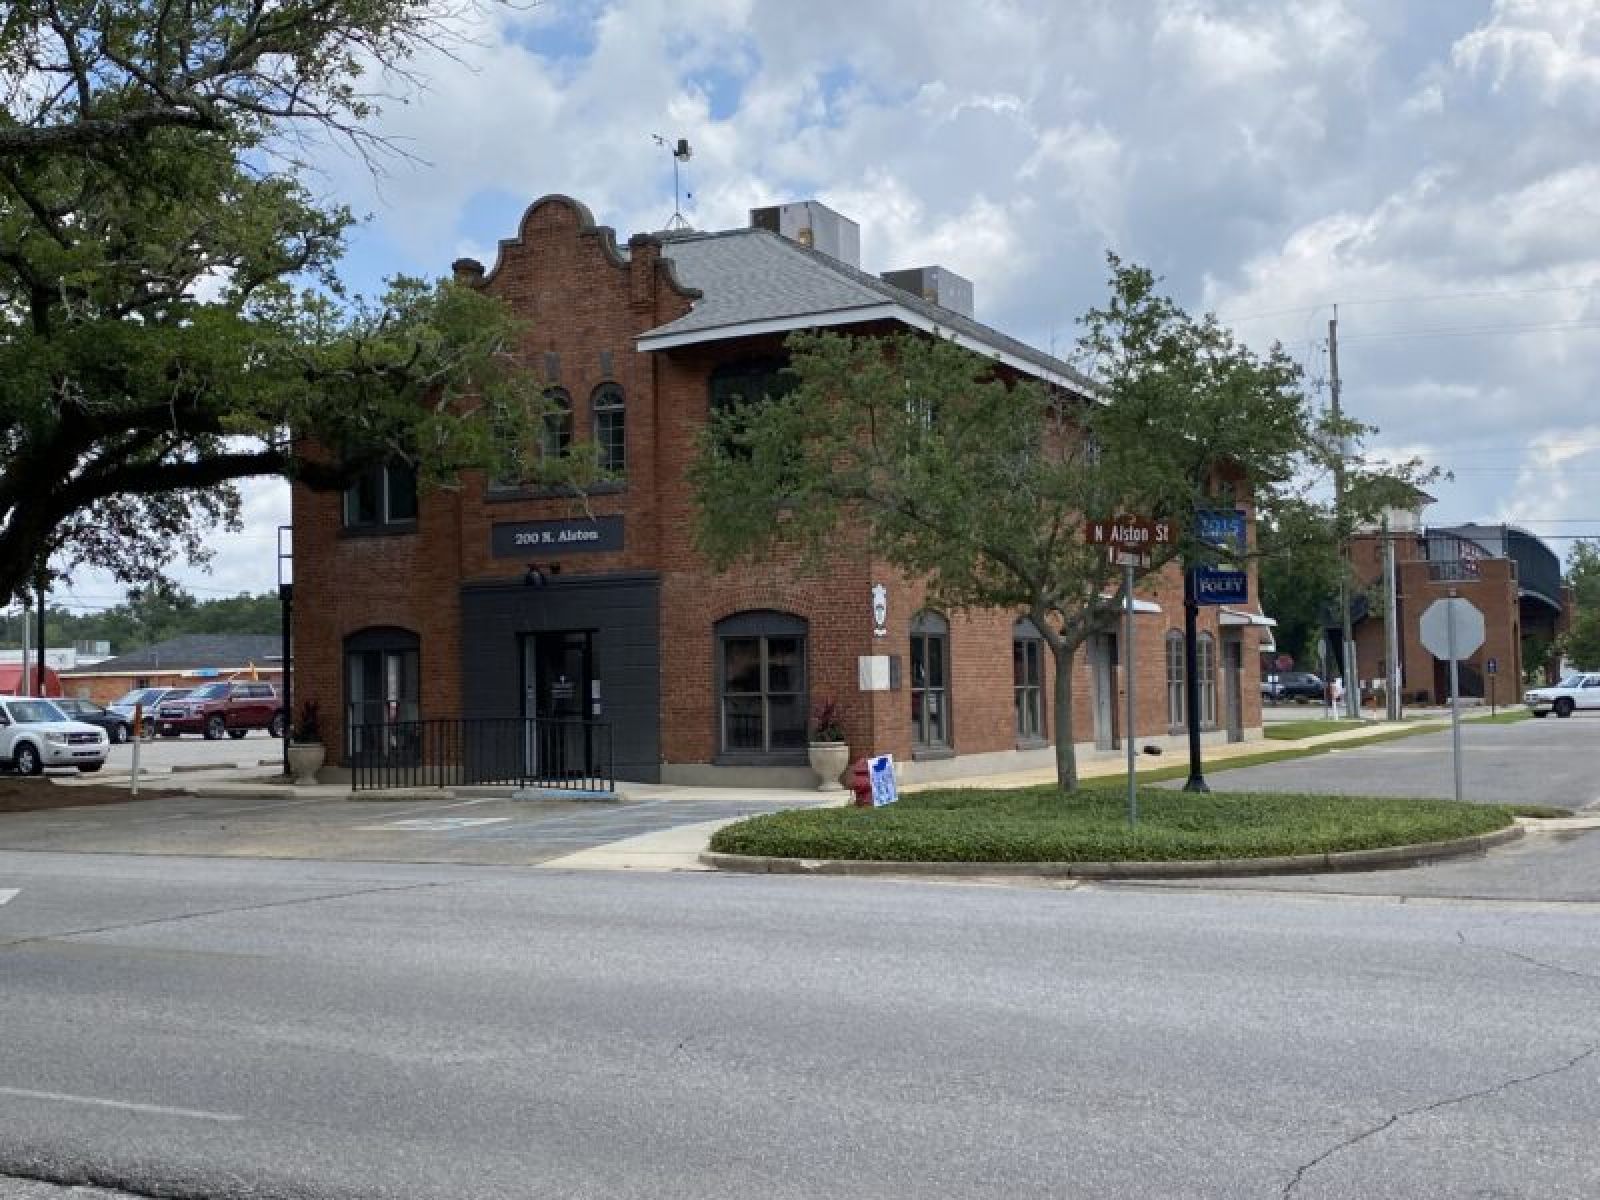 Saved from Destruction, Historic Foley Building Now Home to Chamber of Commerce